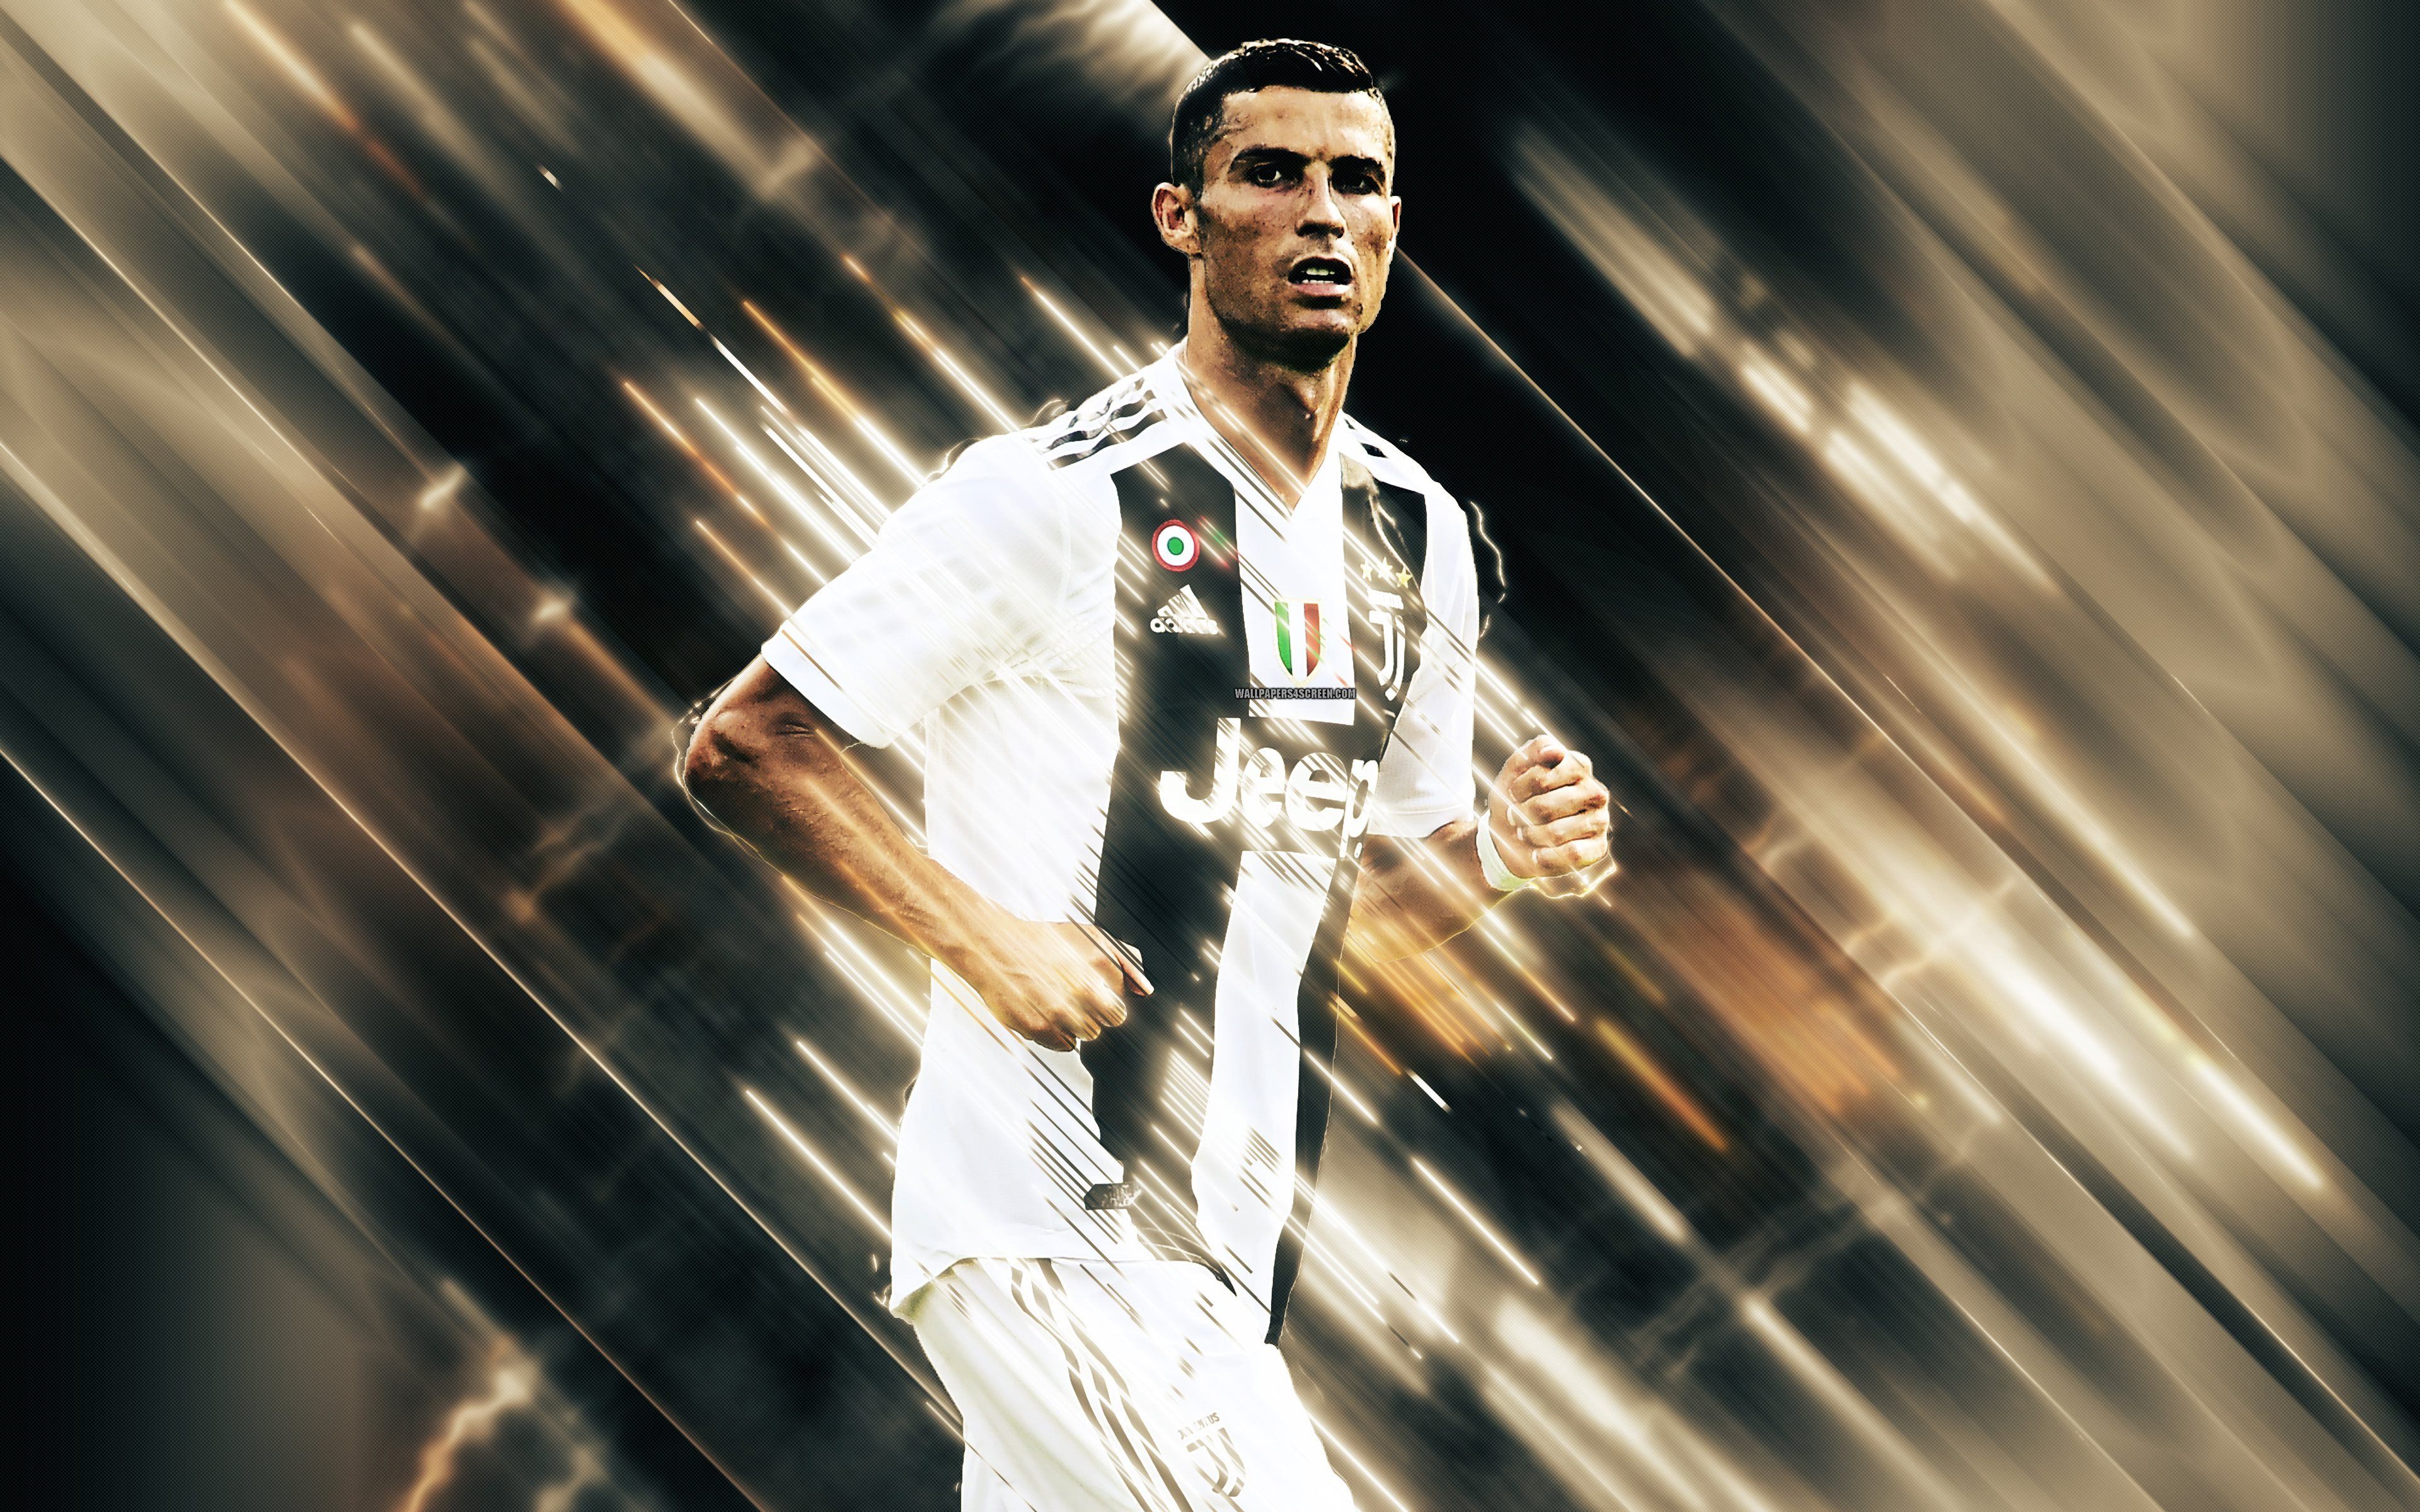 Download wallpaper Cristiano Ronaldo, CR striker, Juventus FC, Portuguese footballer, Italian Serie A, Turin, Italy, Juve, Ronaldo for desktop with resolution 3840x2400. High Quality HD picture wallpaper